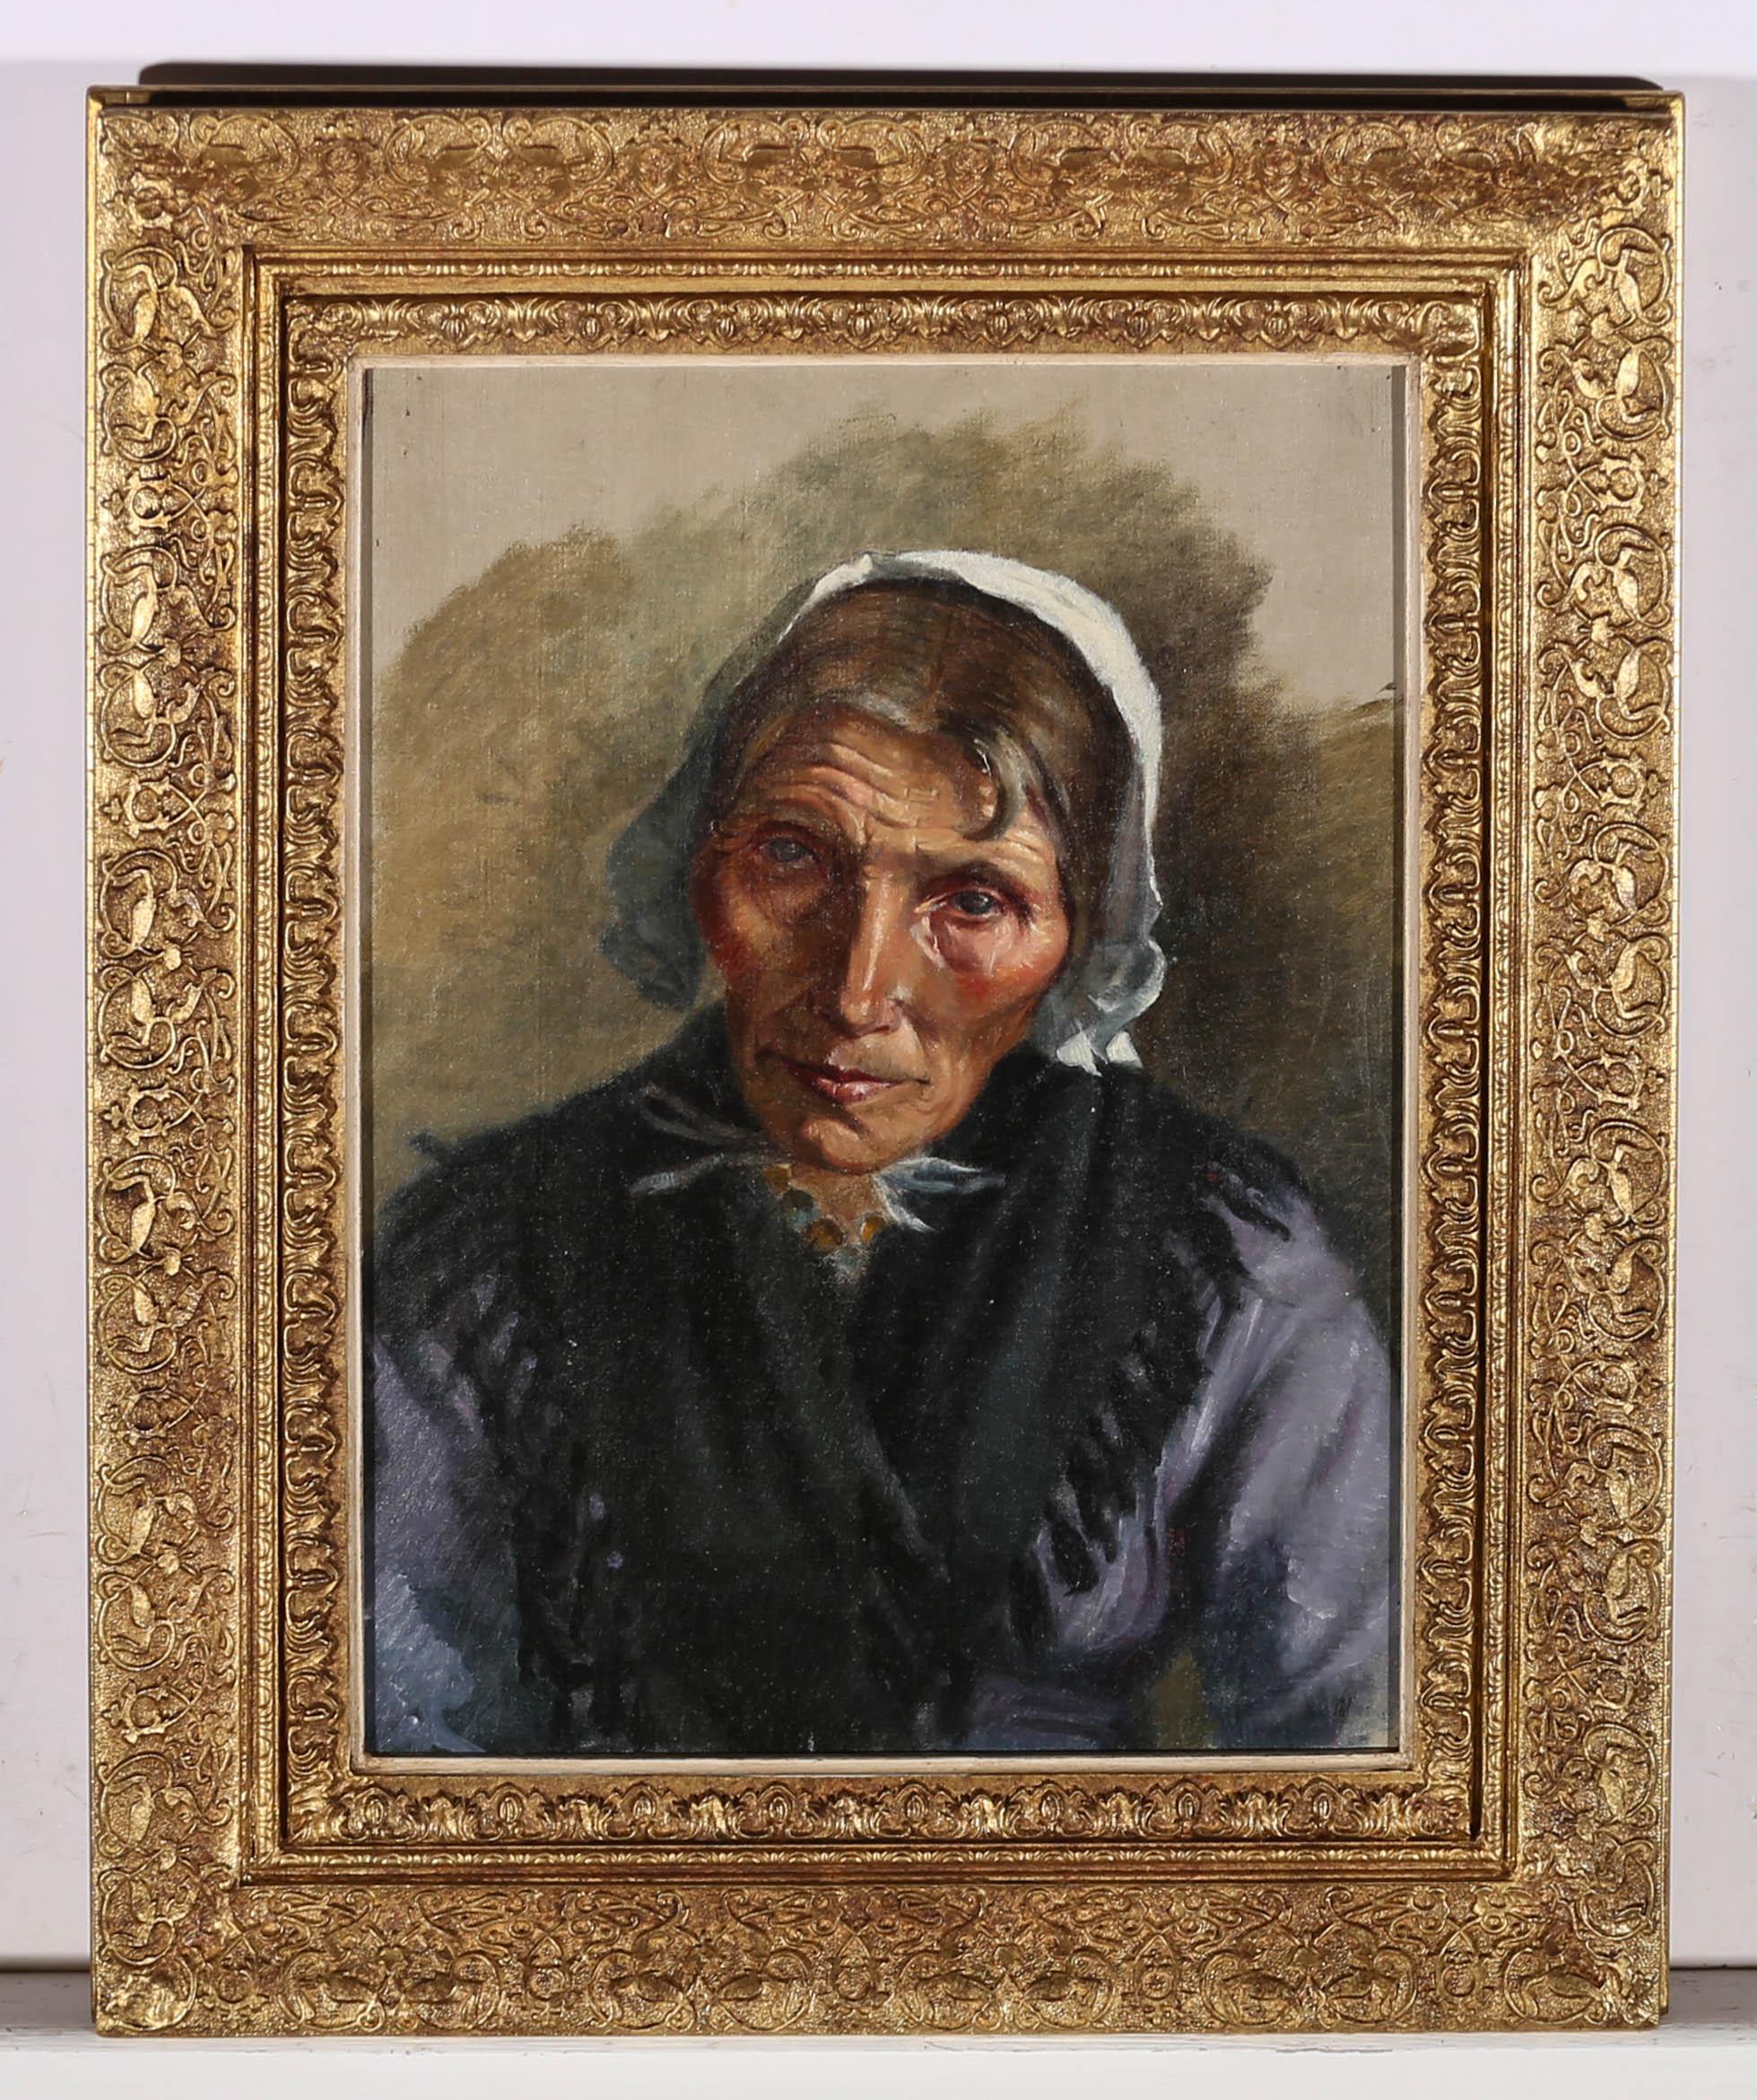 Unknown Portrait Painting - Late 19th Century Oil - The Elderly Woman